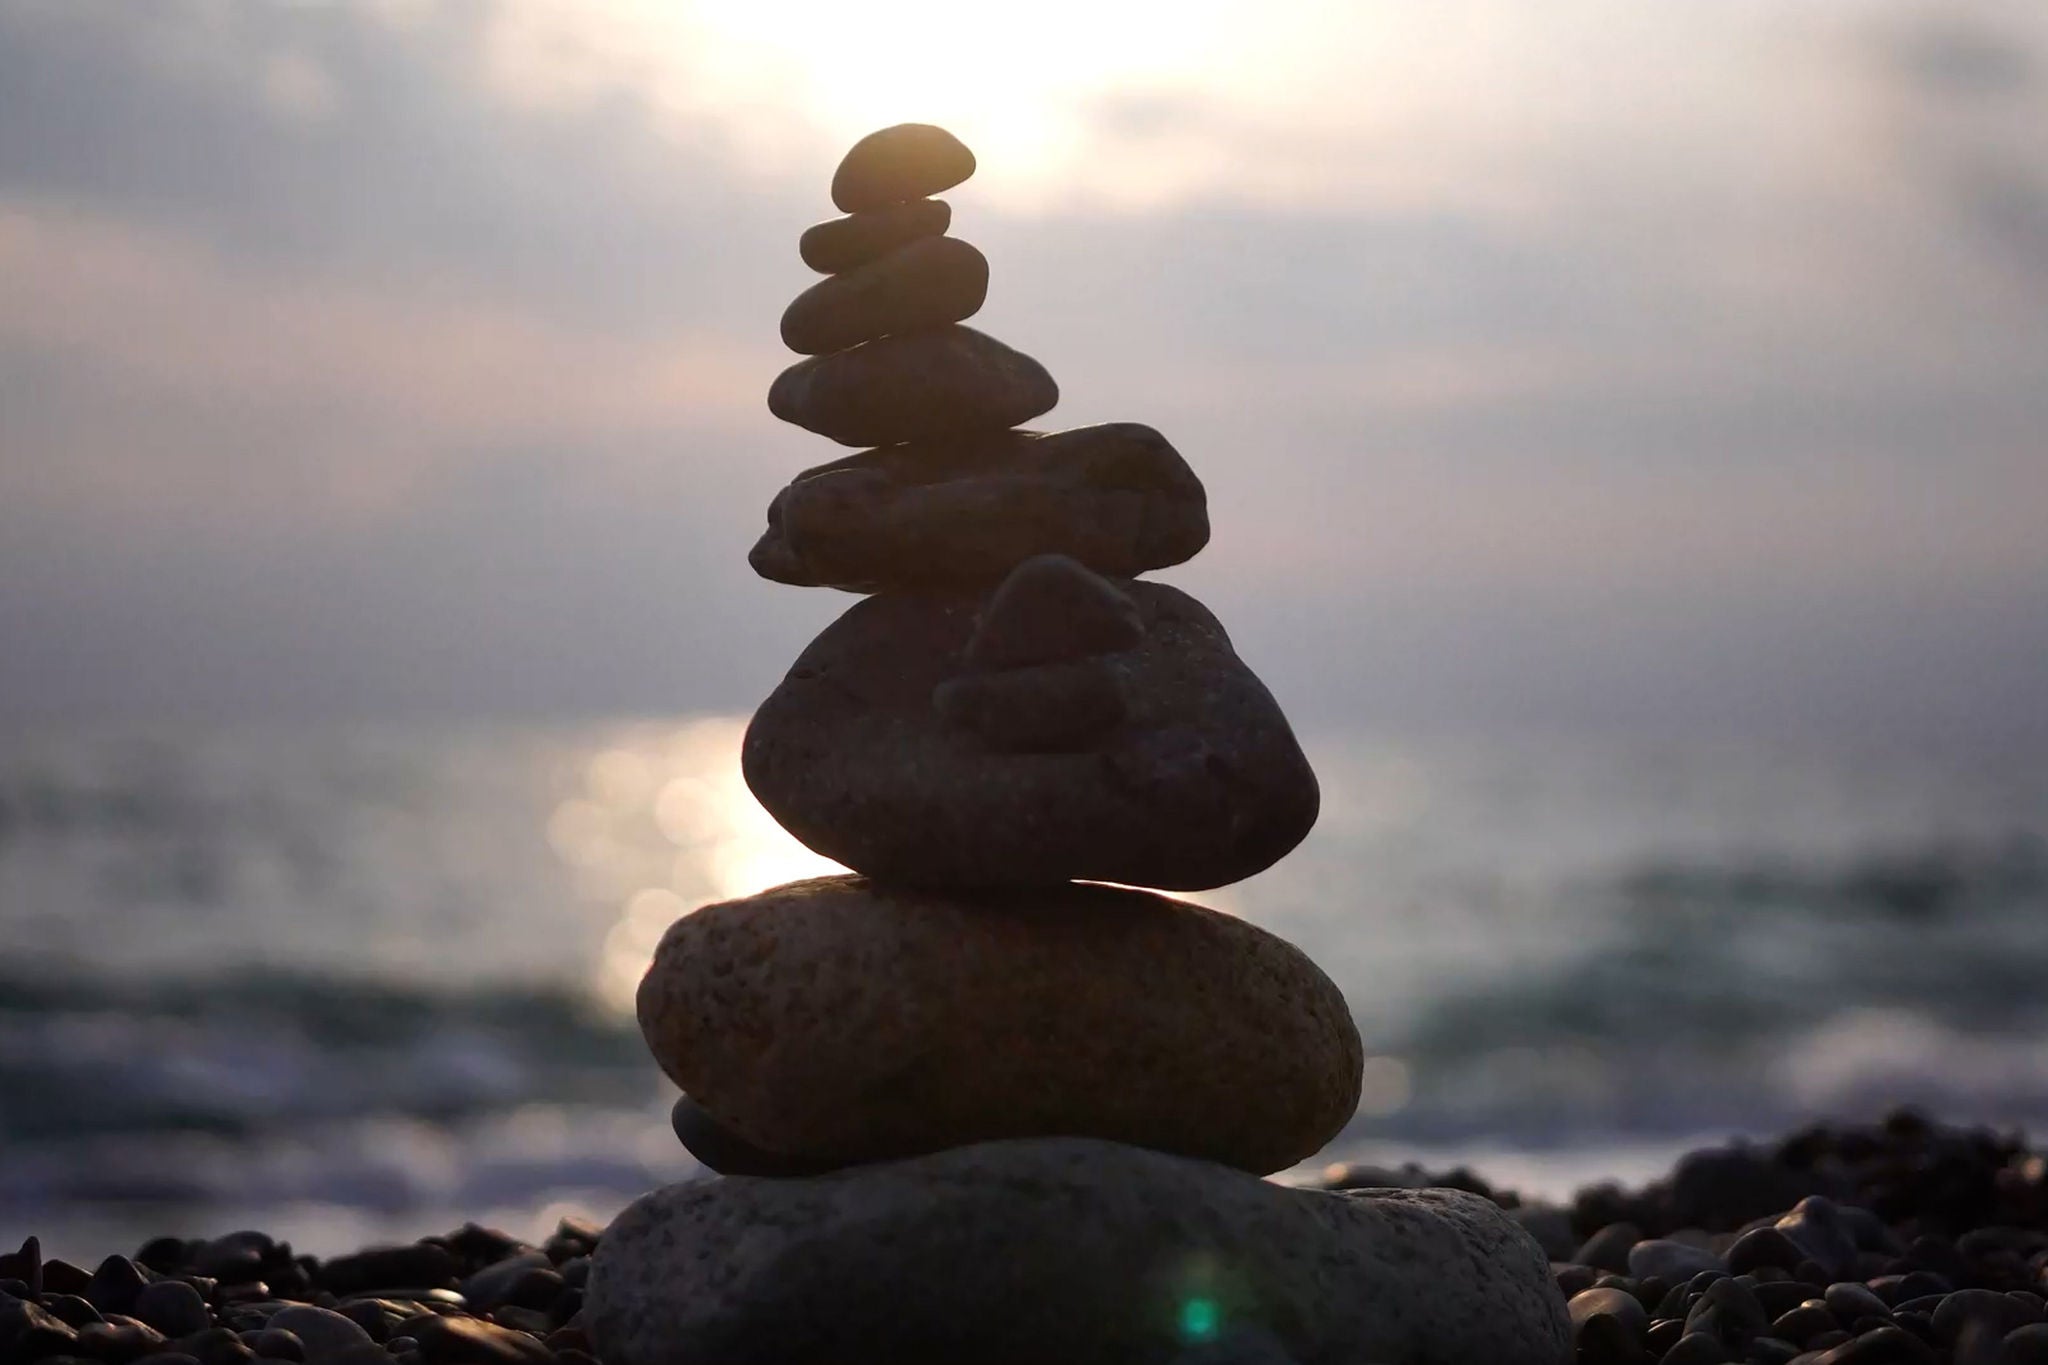 Balanced pebbles pyramid on the beach on cloudy day and clear sky at sunset